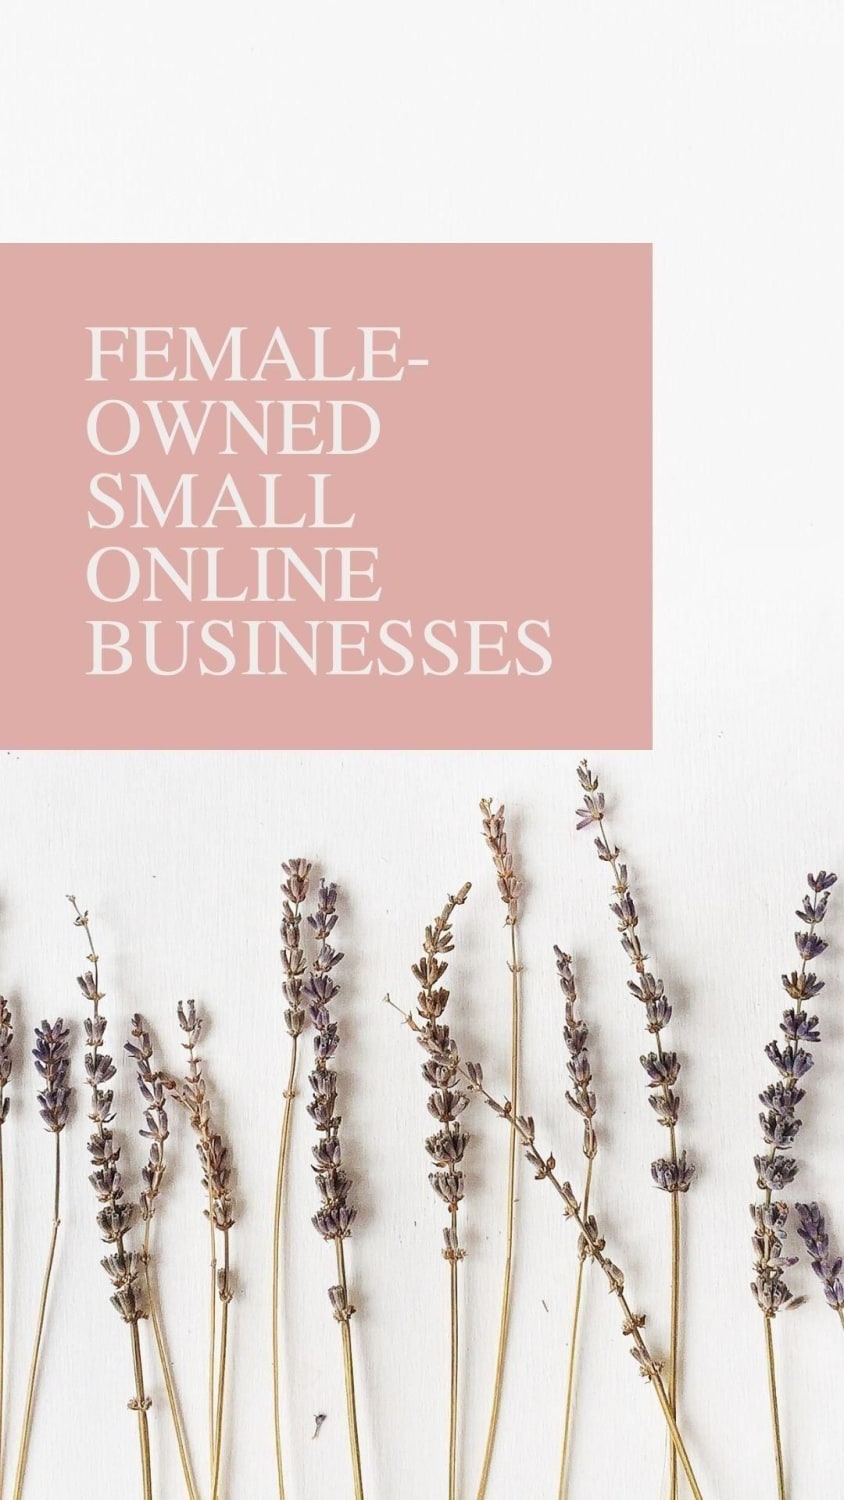 5 Female-Owned Small Online Businesses By Blair Staky